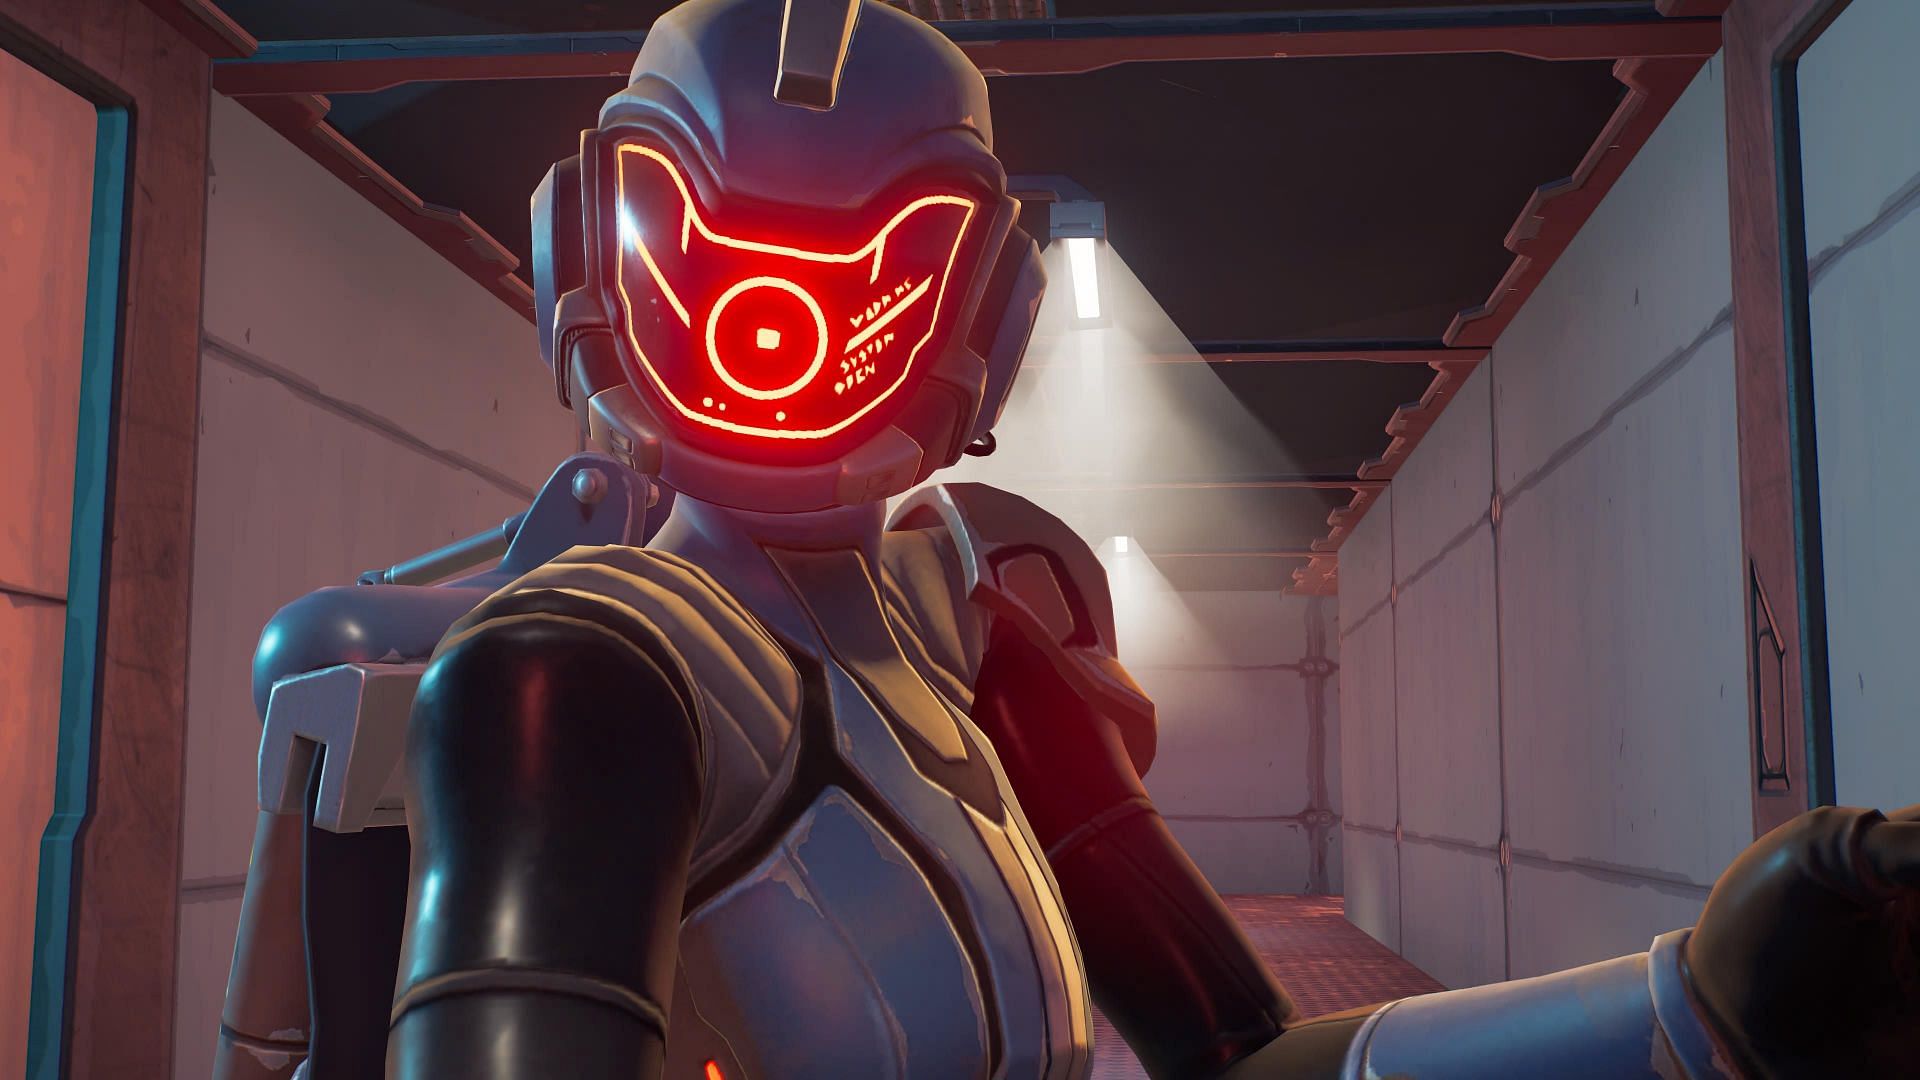 Paradigm is back in Fortnite as one of the rarest skins, now players can get it for free (Image via Twitter/the_seven_7_)